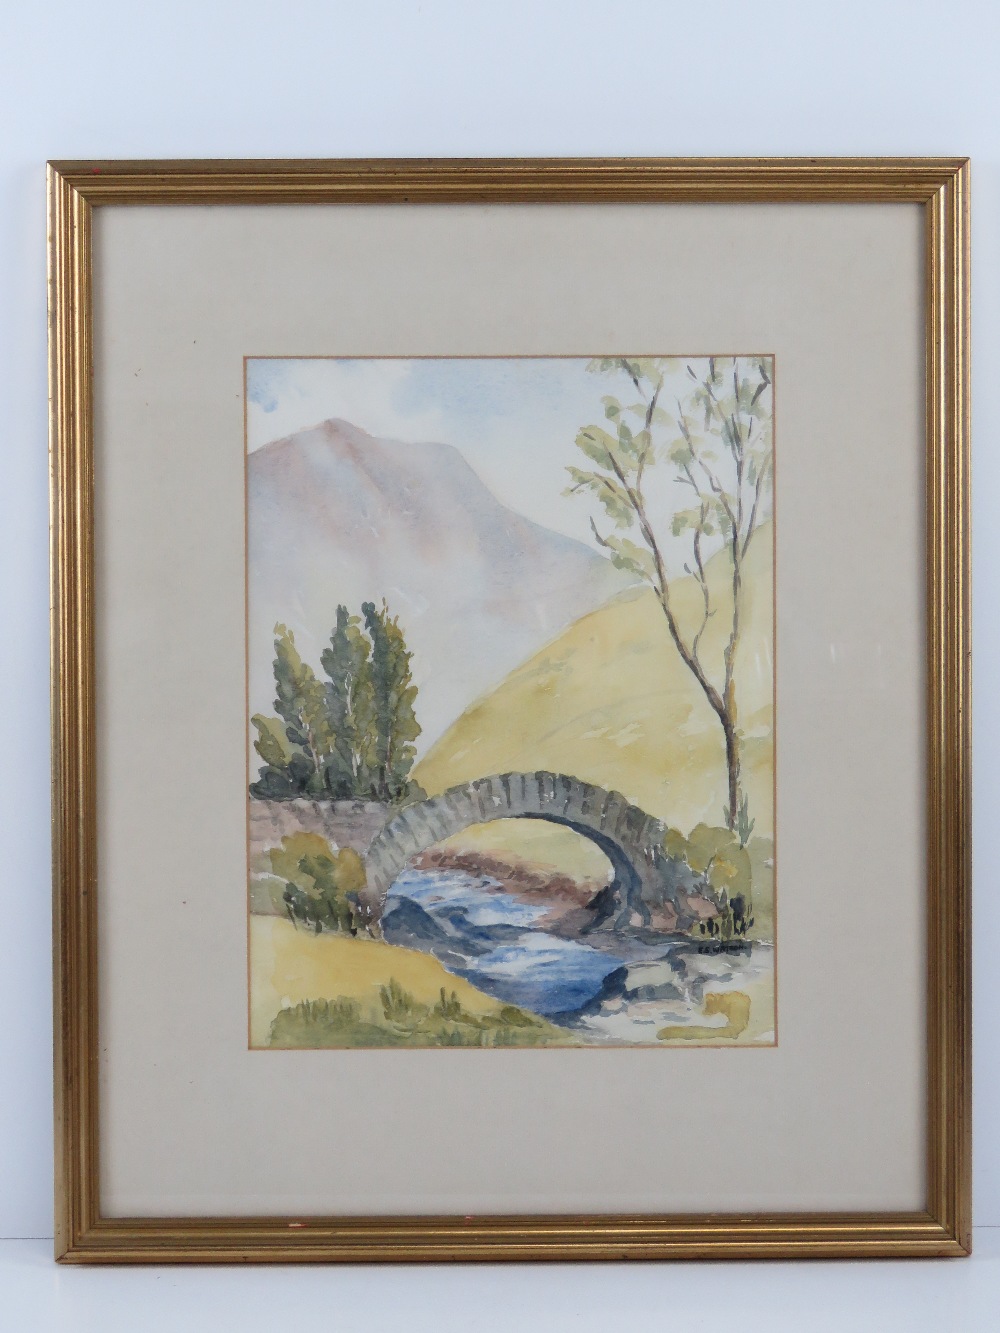 Watercolour by Eve Watson 'Pack horse bridge', signed lower right, 31.5 x 24cm, framed and glazed.